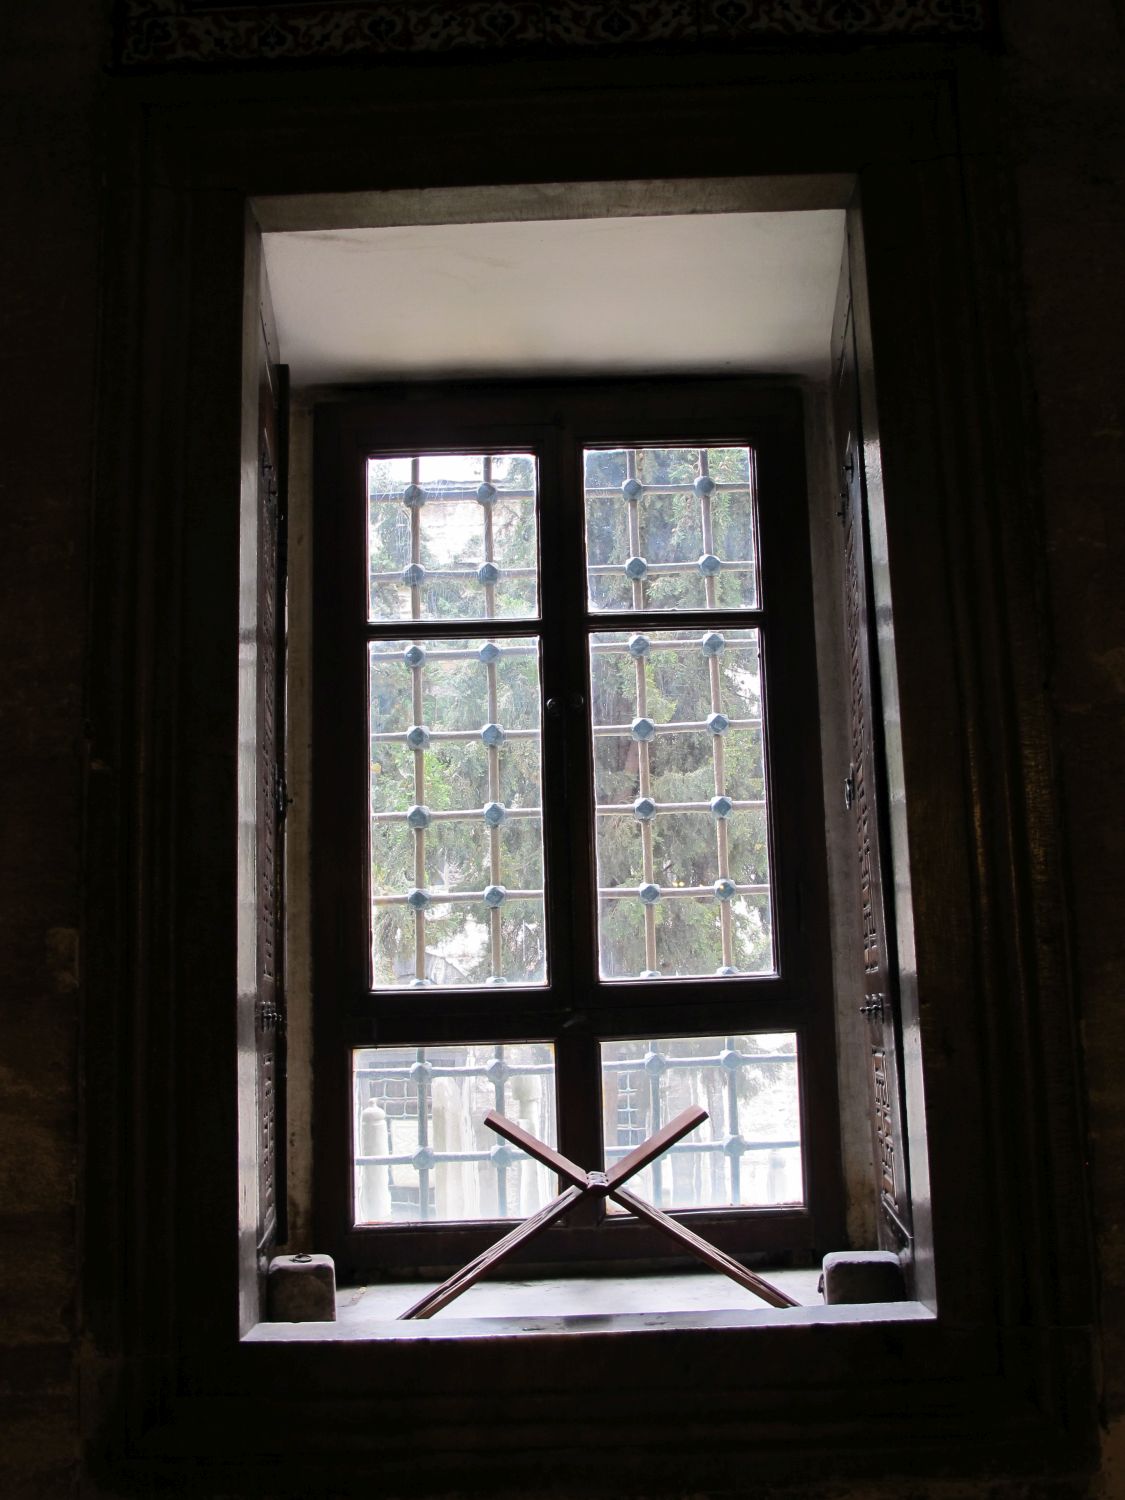 Interior detail view, window with a bookstand